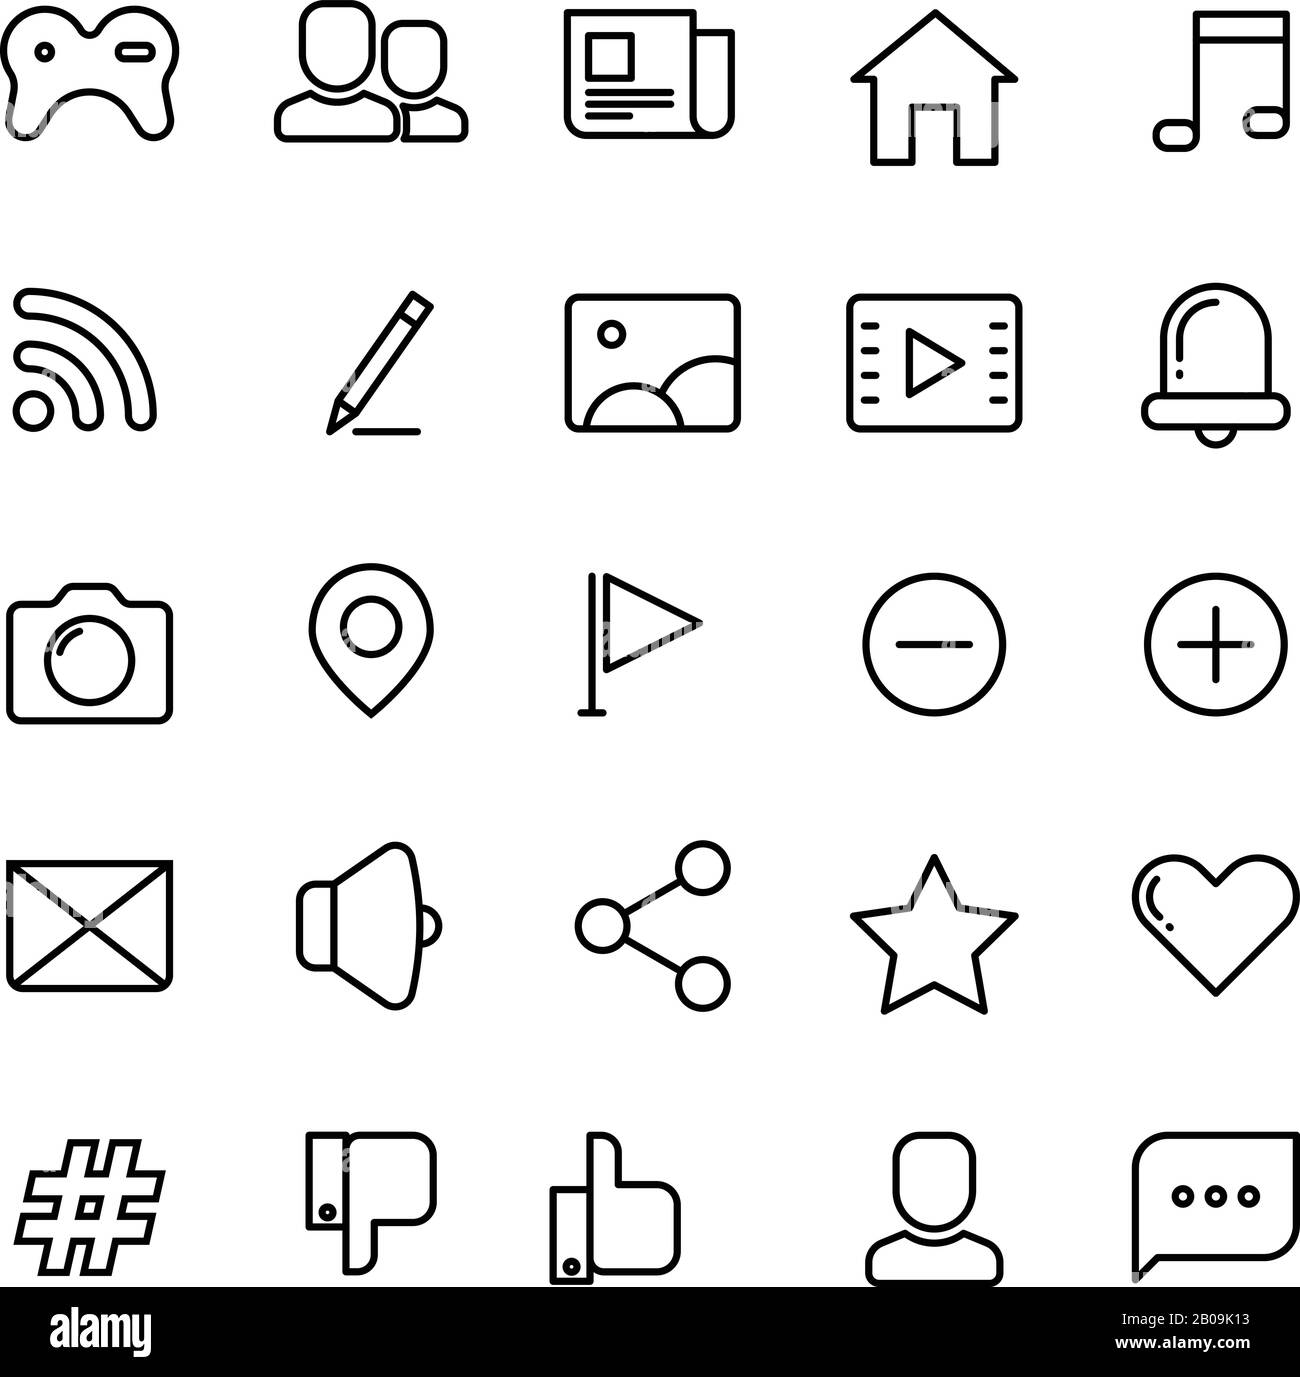 Web, social network, social media and communication thin line vector icons. Collection of icons for social networking application illustration Stock Vector